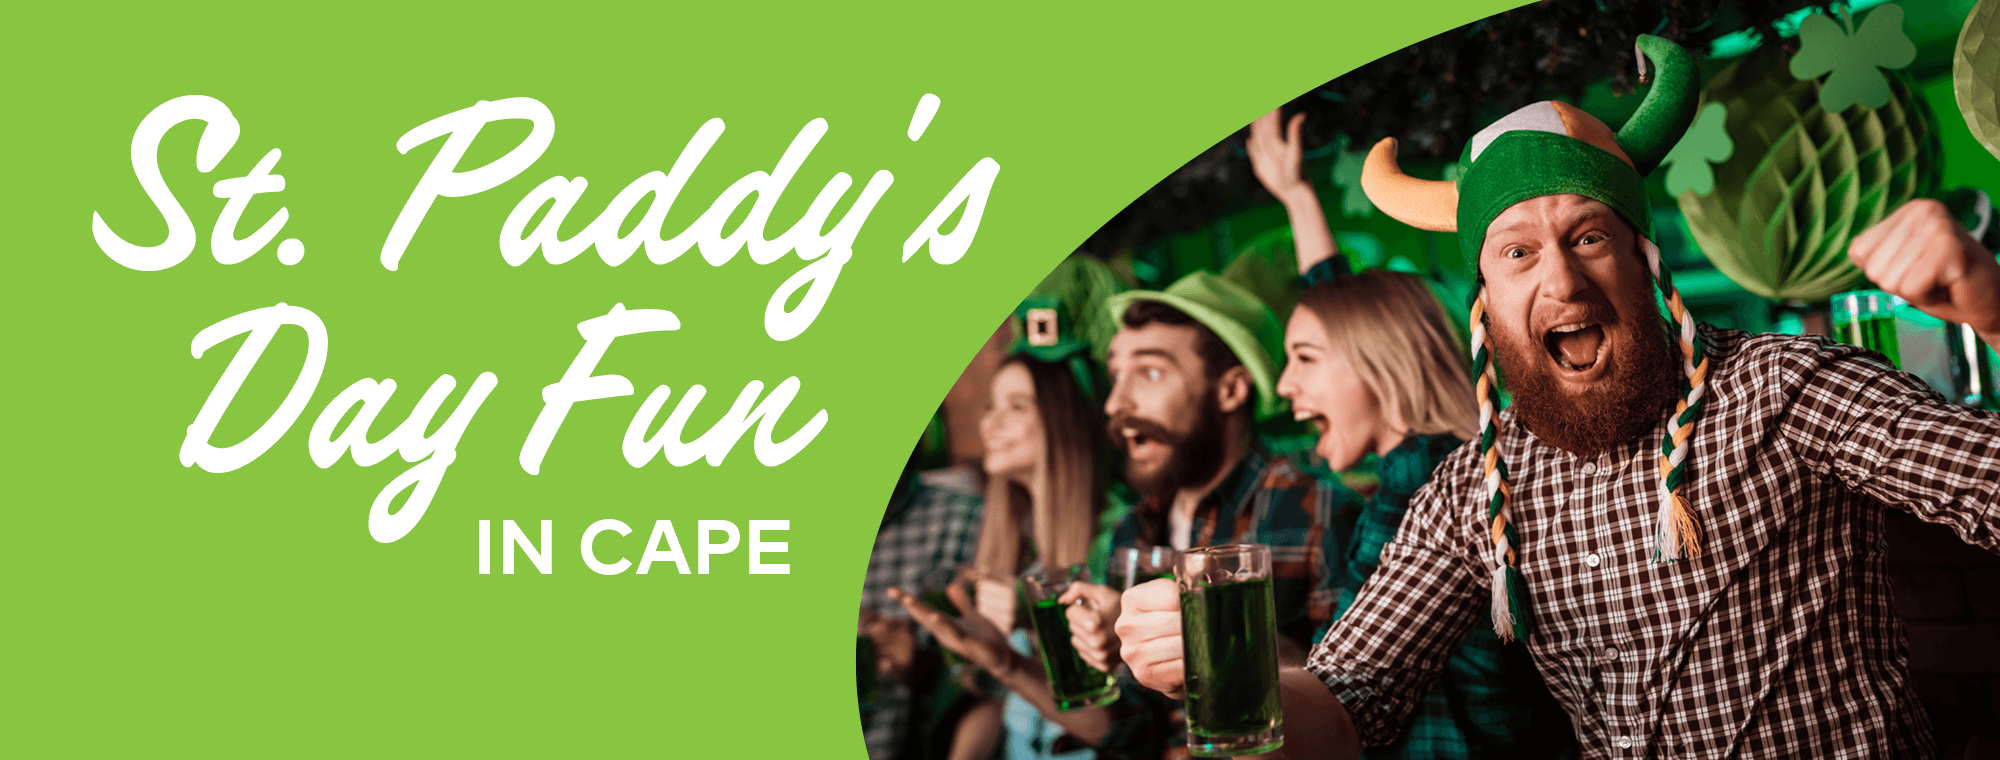 St. Paddy's Day Fun in Cape Girardeau with an image of a man holding a stein of green beer.